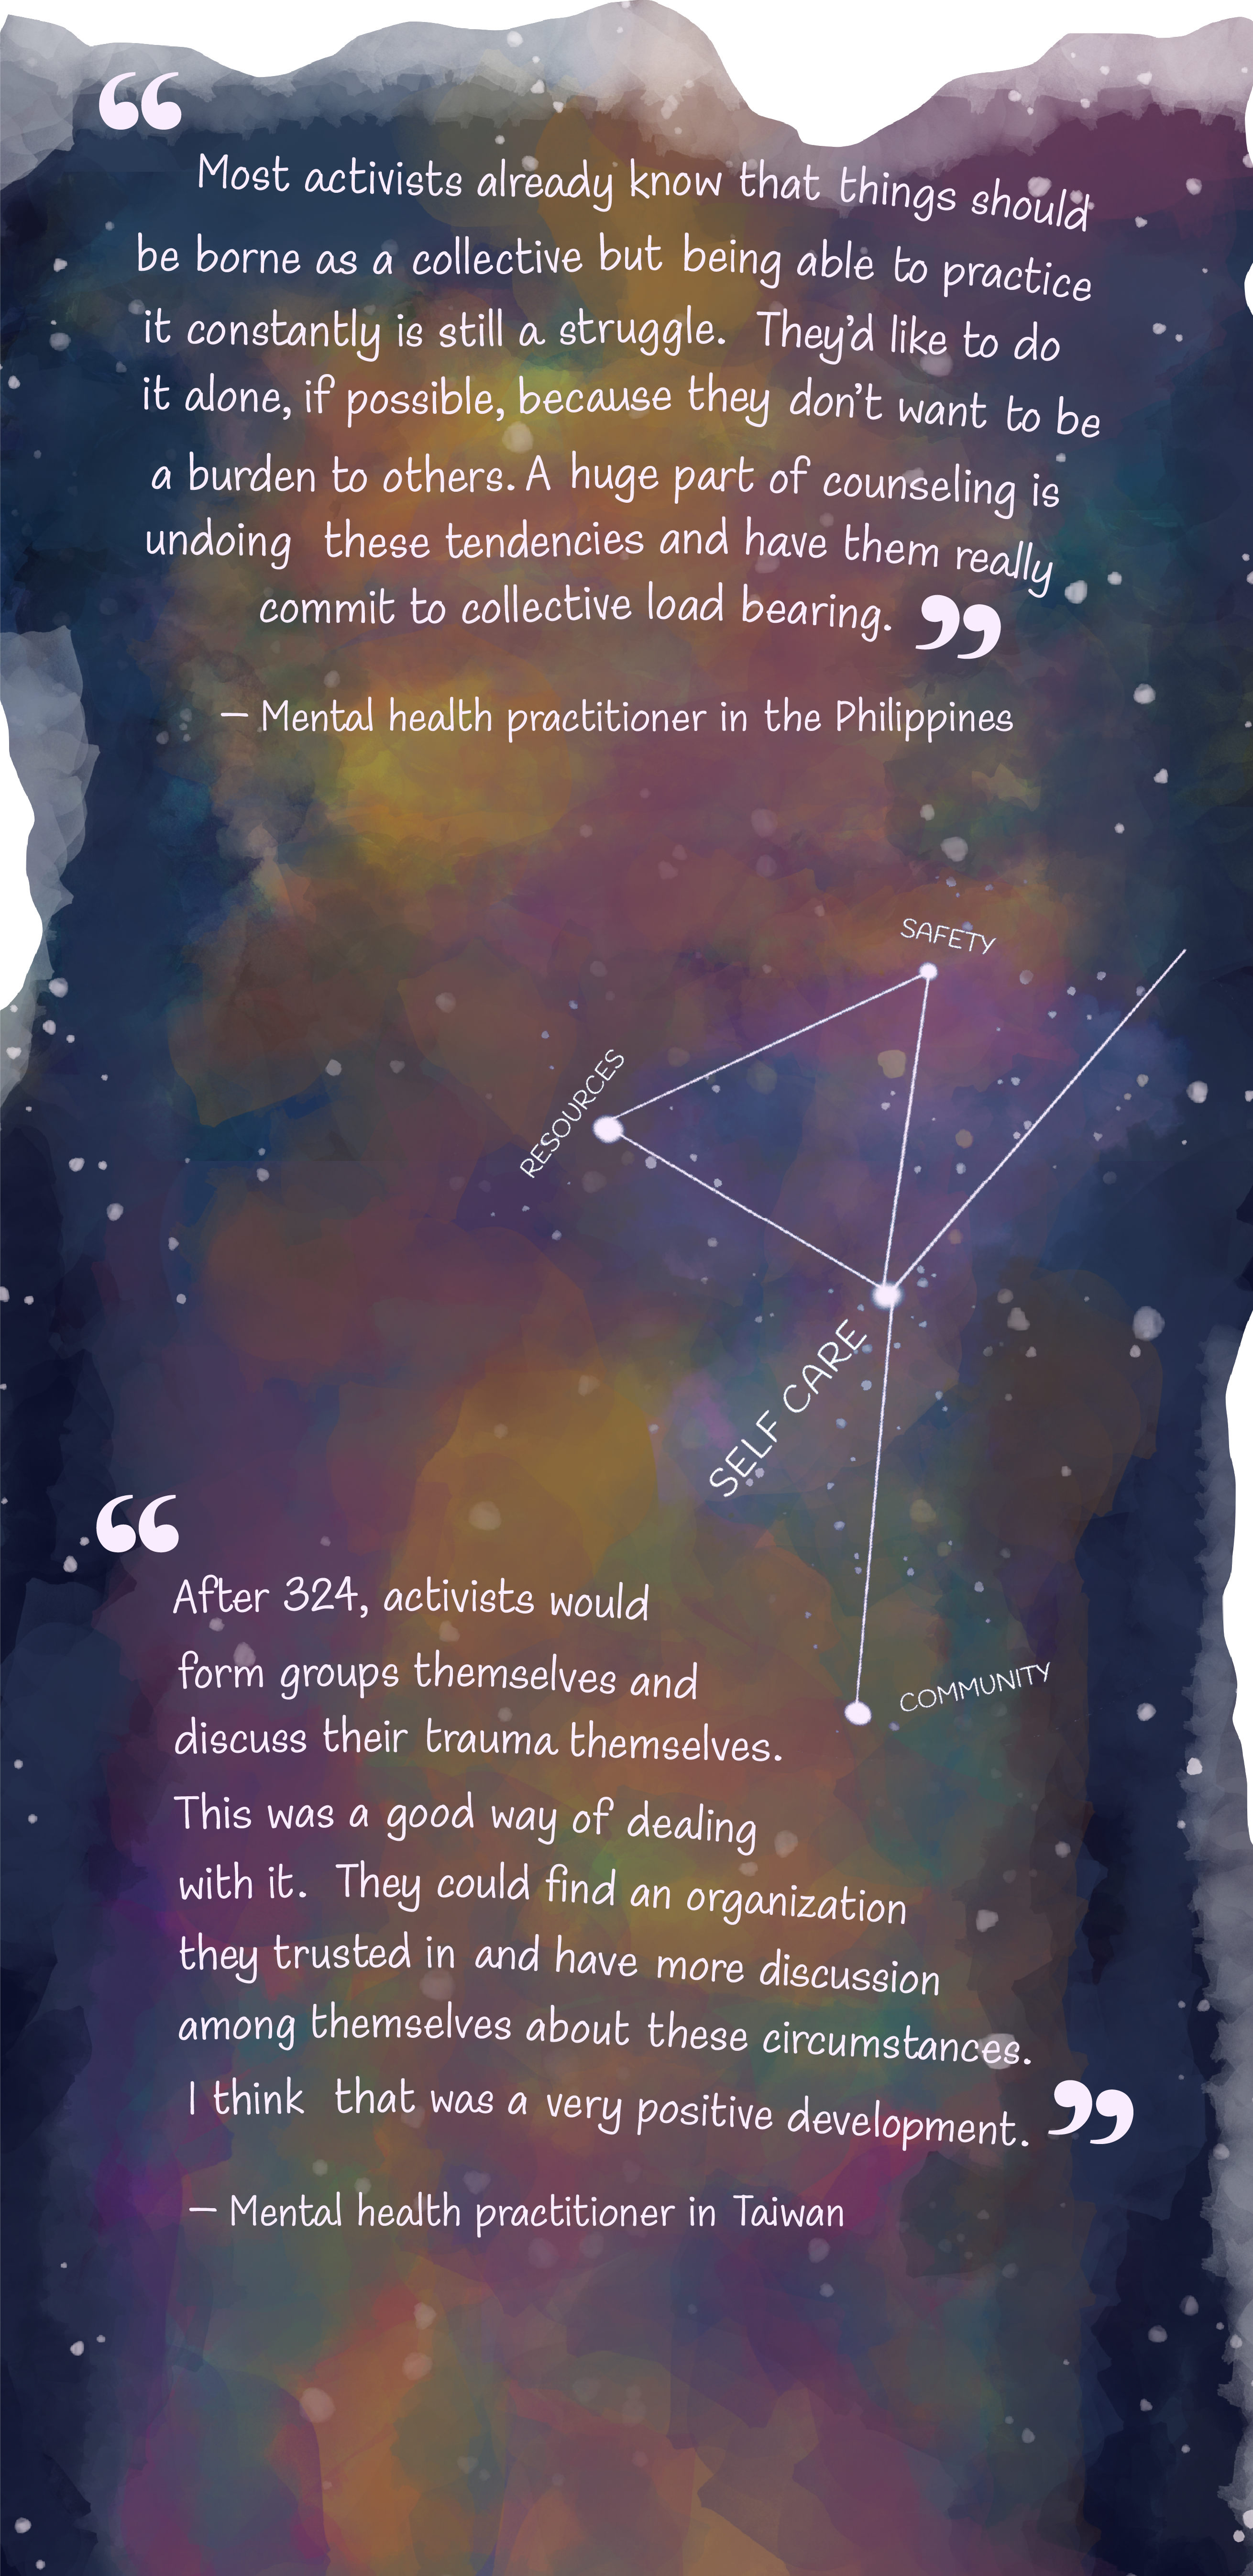 A watercolor wash that looks like a purplish–blue galaxy with clouds of green, yellow and pink. Written on top are 2 quotes from 2 mental health practitioners. The first quote by a mental health practitioner in the Philippines is “Most activists already know that things should be borne as a collective but being able to practice it constantly is still a struggle. They’d like to do it alone, if possible, because they don’t want to be a burden to others. A huge part of counseling is undoing these tendencies and have them really commit to collective load bearing”. The last quote is from a practitioner in Taiwan that goes, “After 324, activists would form groups themselves and discuss their trauma themselves. This was a good way of dealing with it. They could find an organization they trusted in and have more discussion among themselves about these circumstances. I think that was a very positive development”. In the corner is a star map that connects the words “Safety”, “Community”, and “Resources” to “Self care”. 